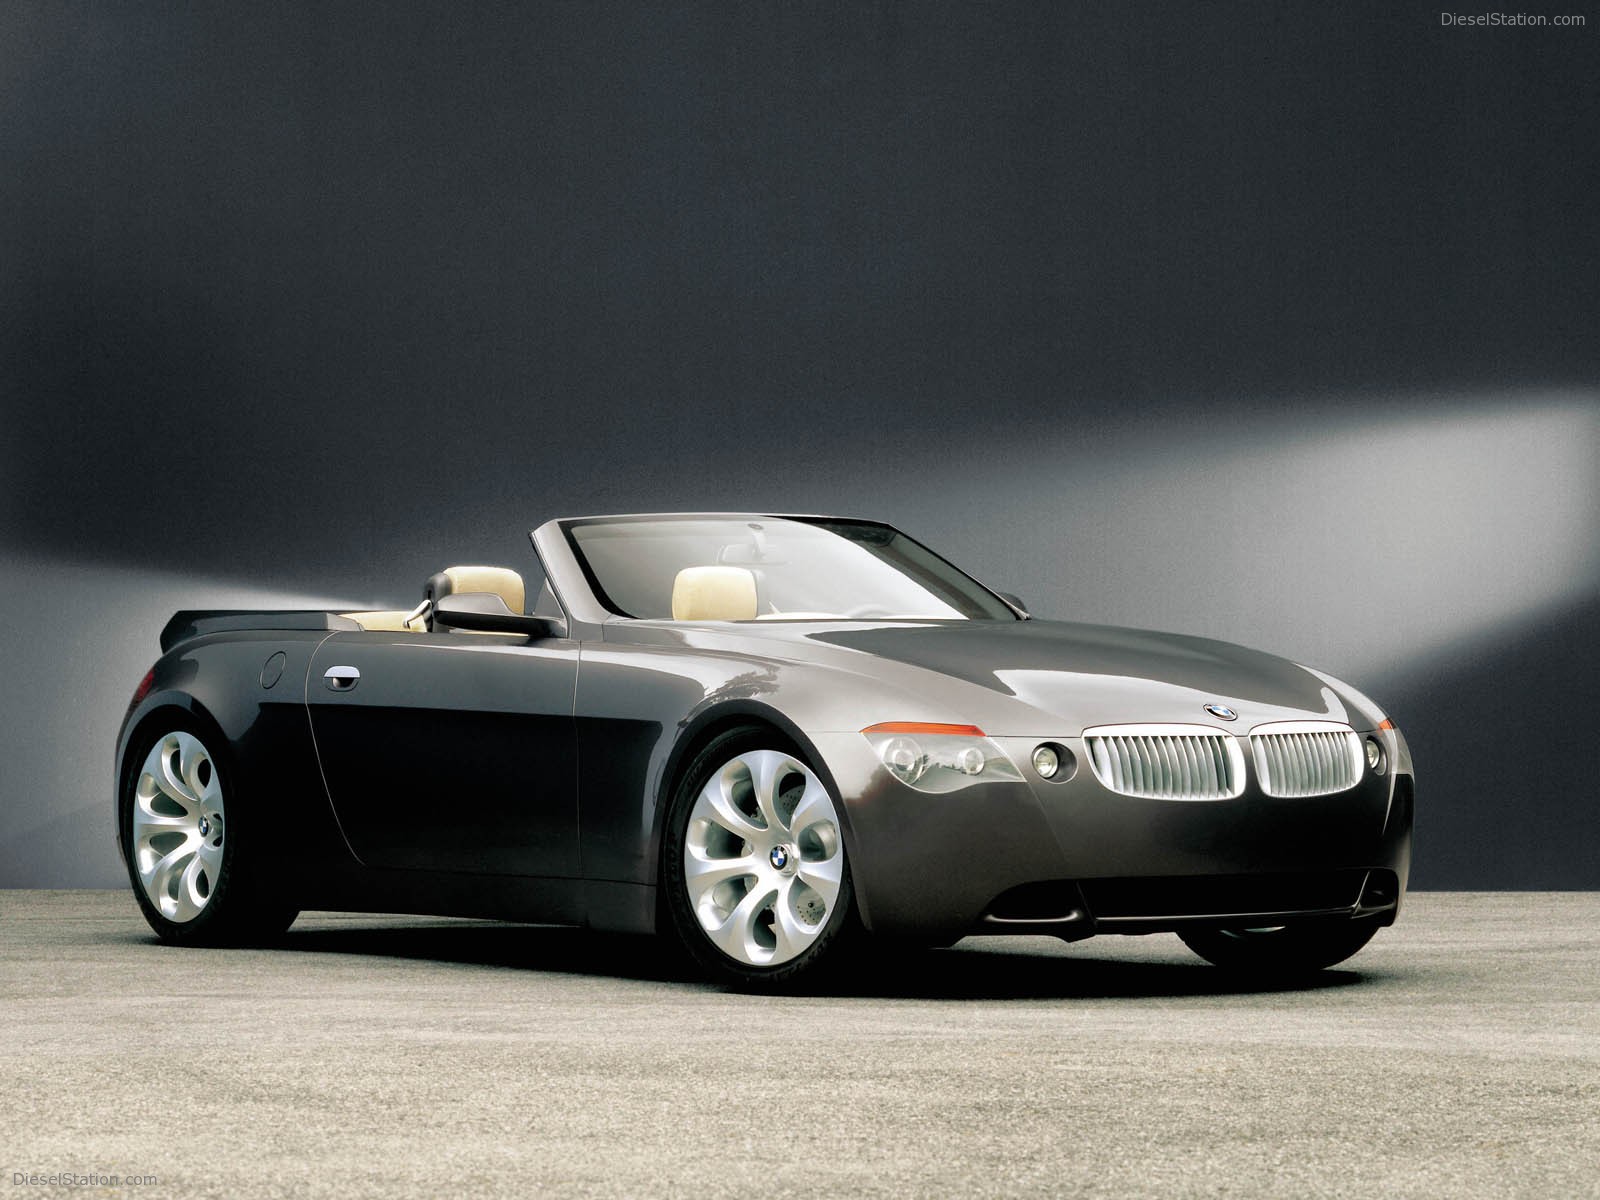 BMW Z9 Concept - Car Picture at Dieselstation